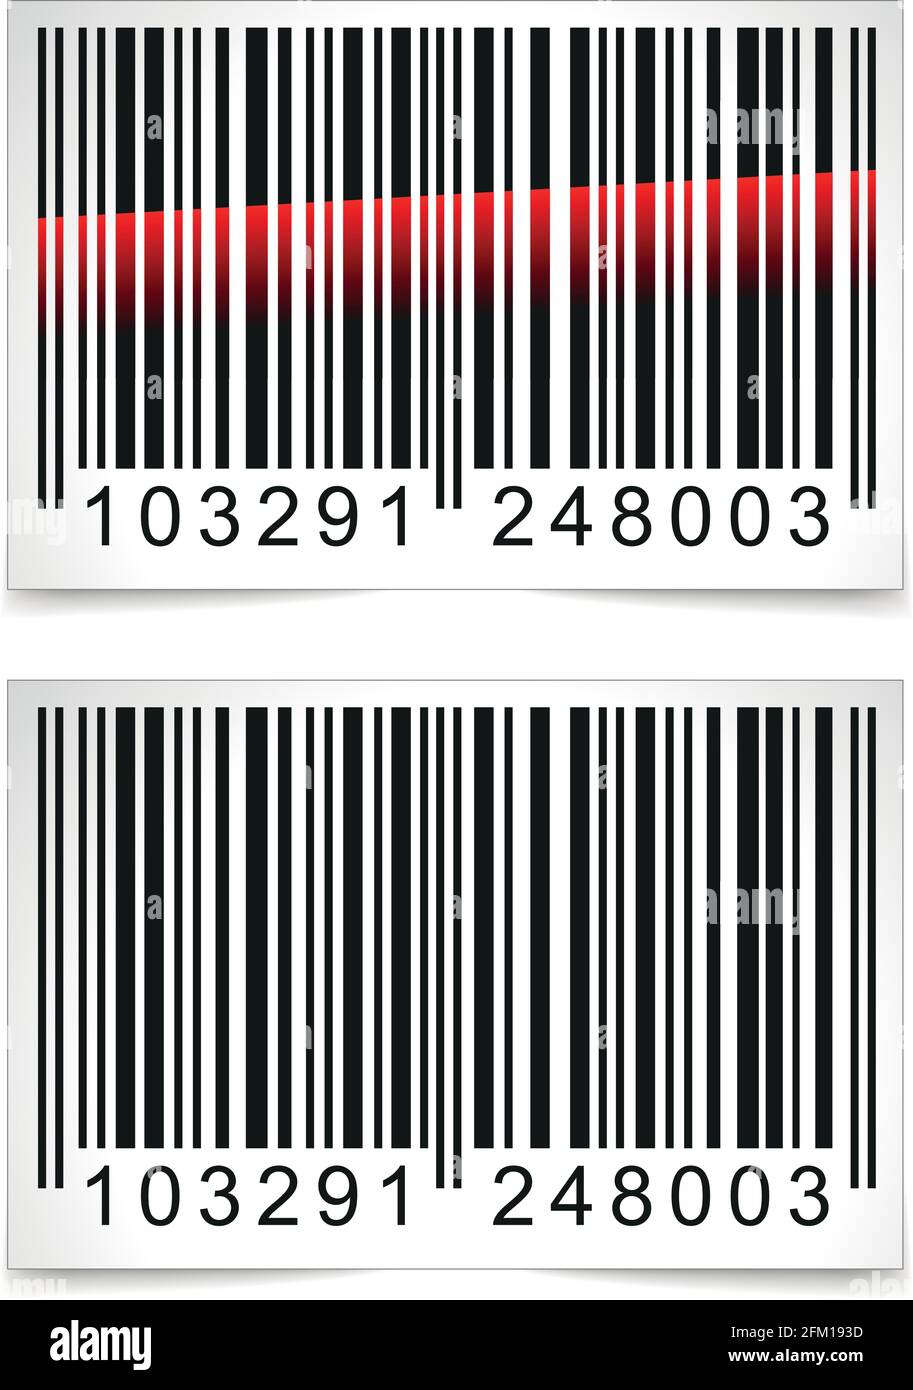 Vector illustration of barcode tag on white background Stock Vector